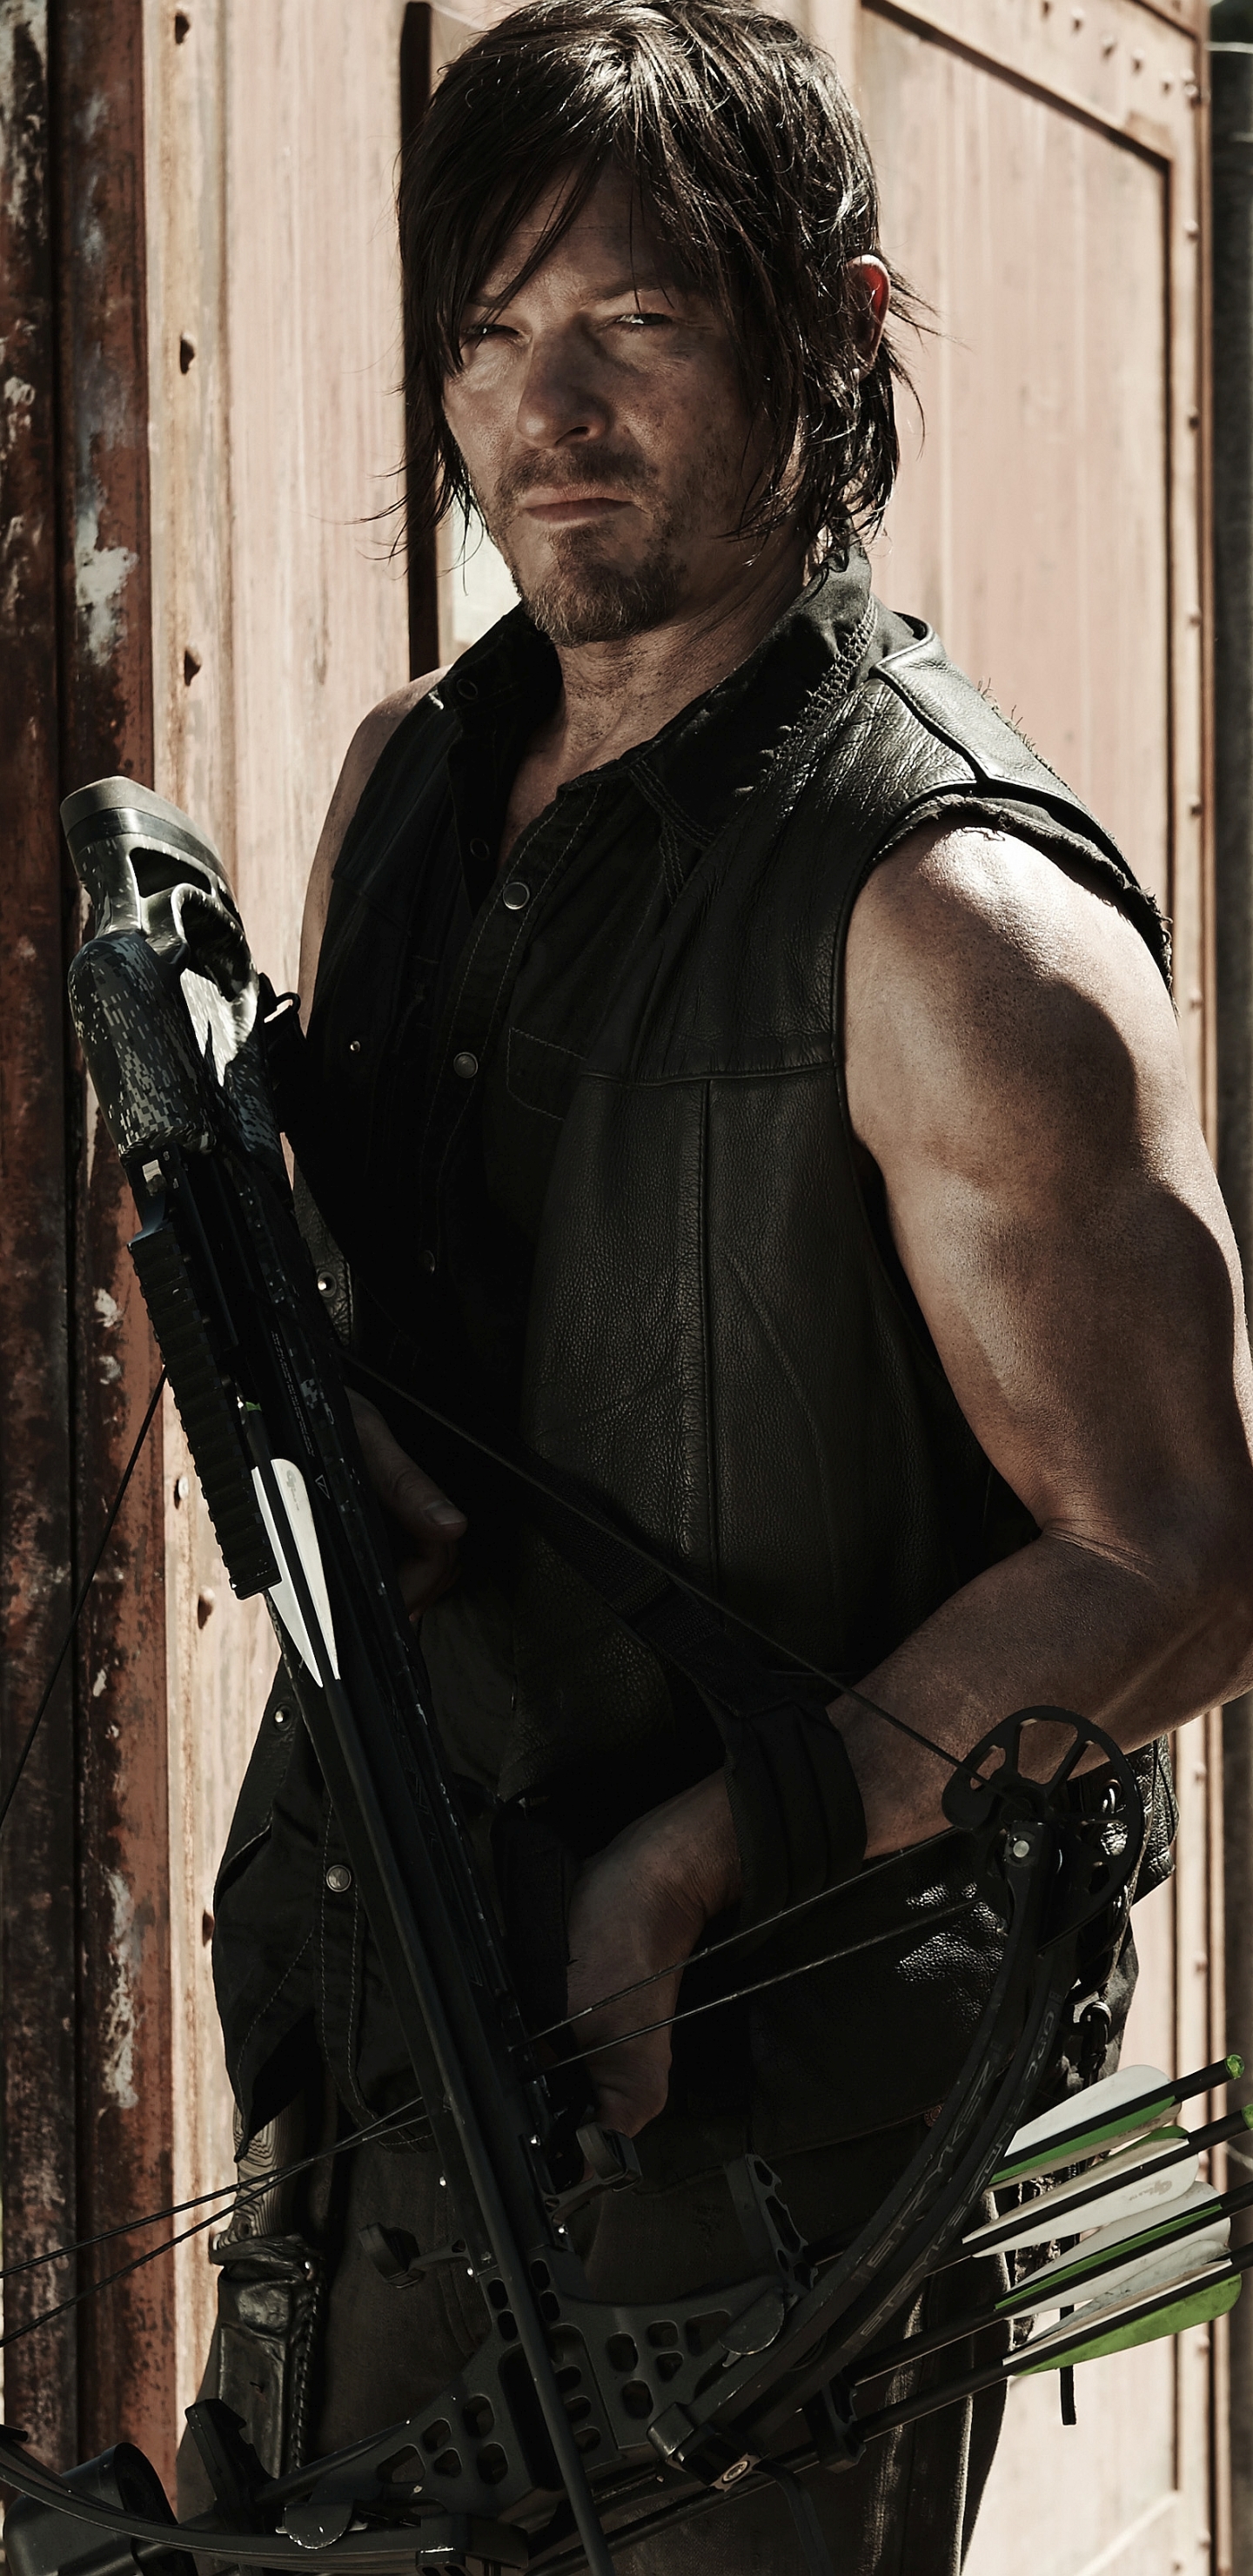 android daryl dixon, tv show, the walking dead, norman reedus, crossbow